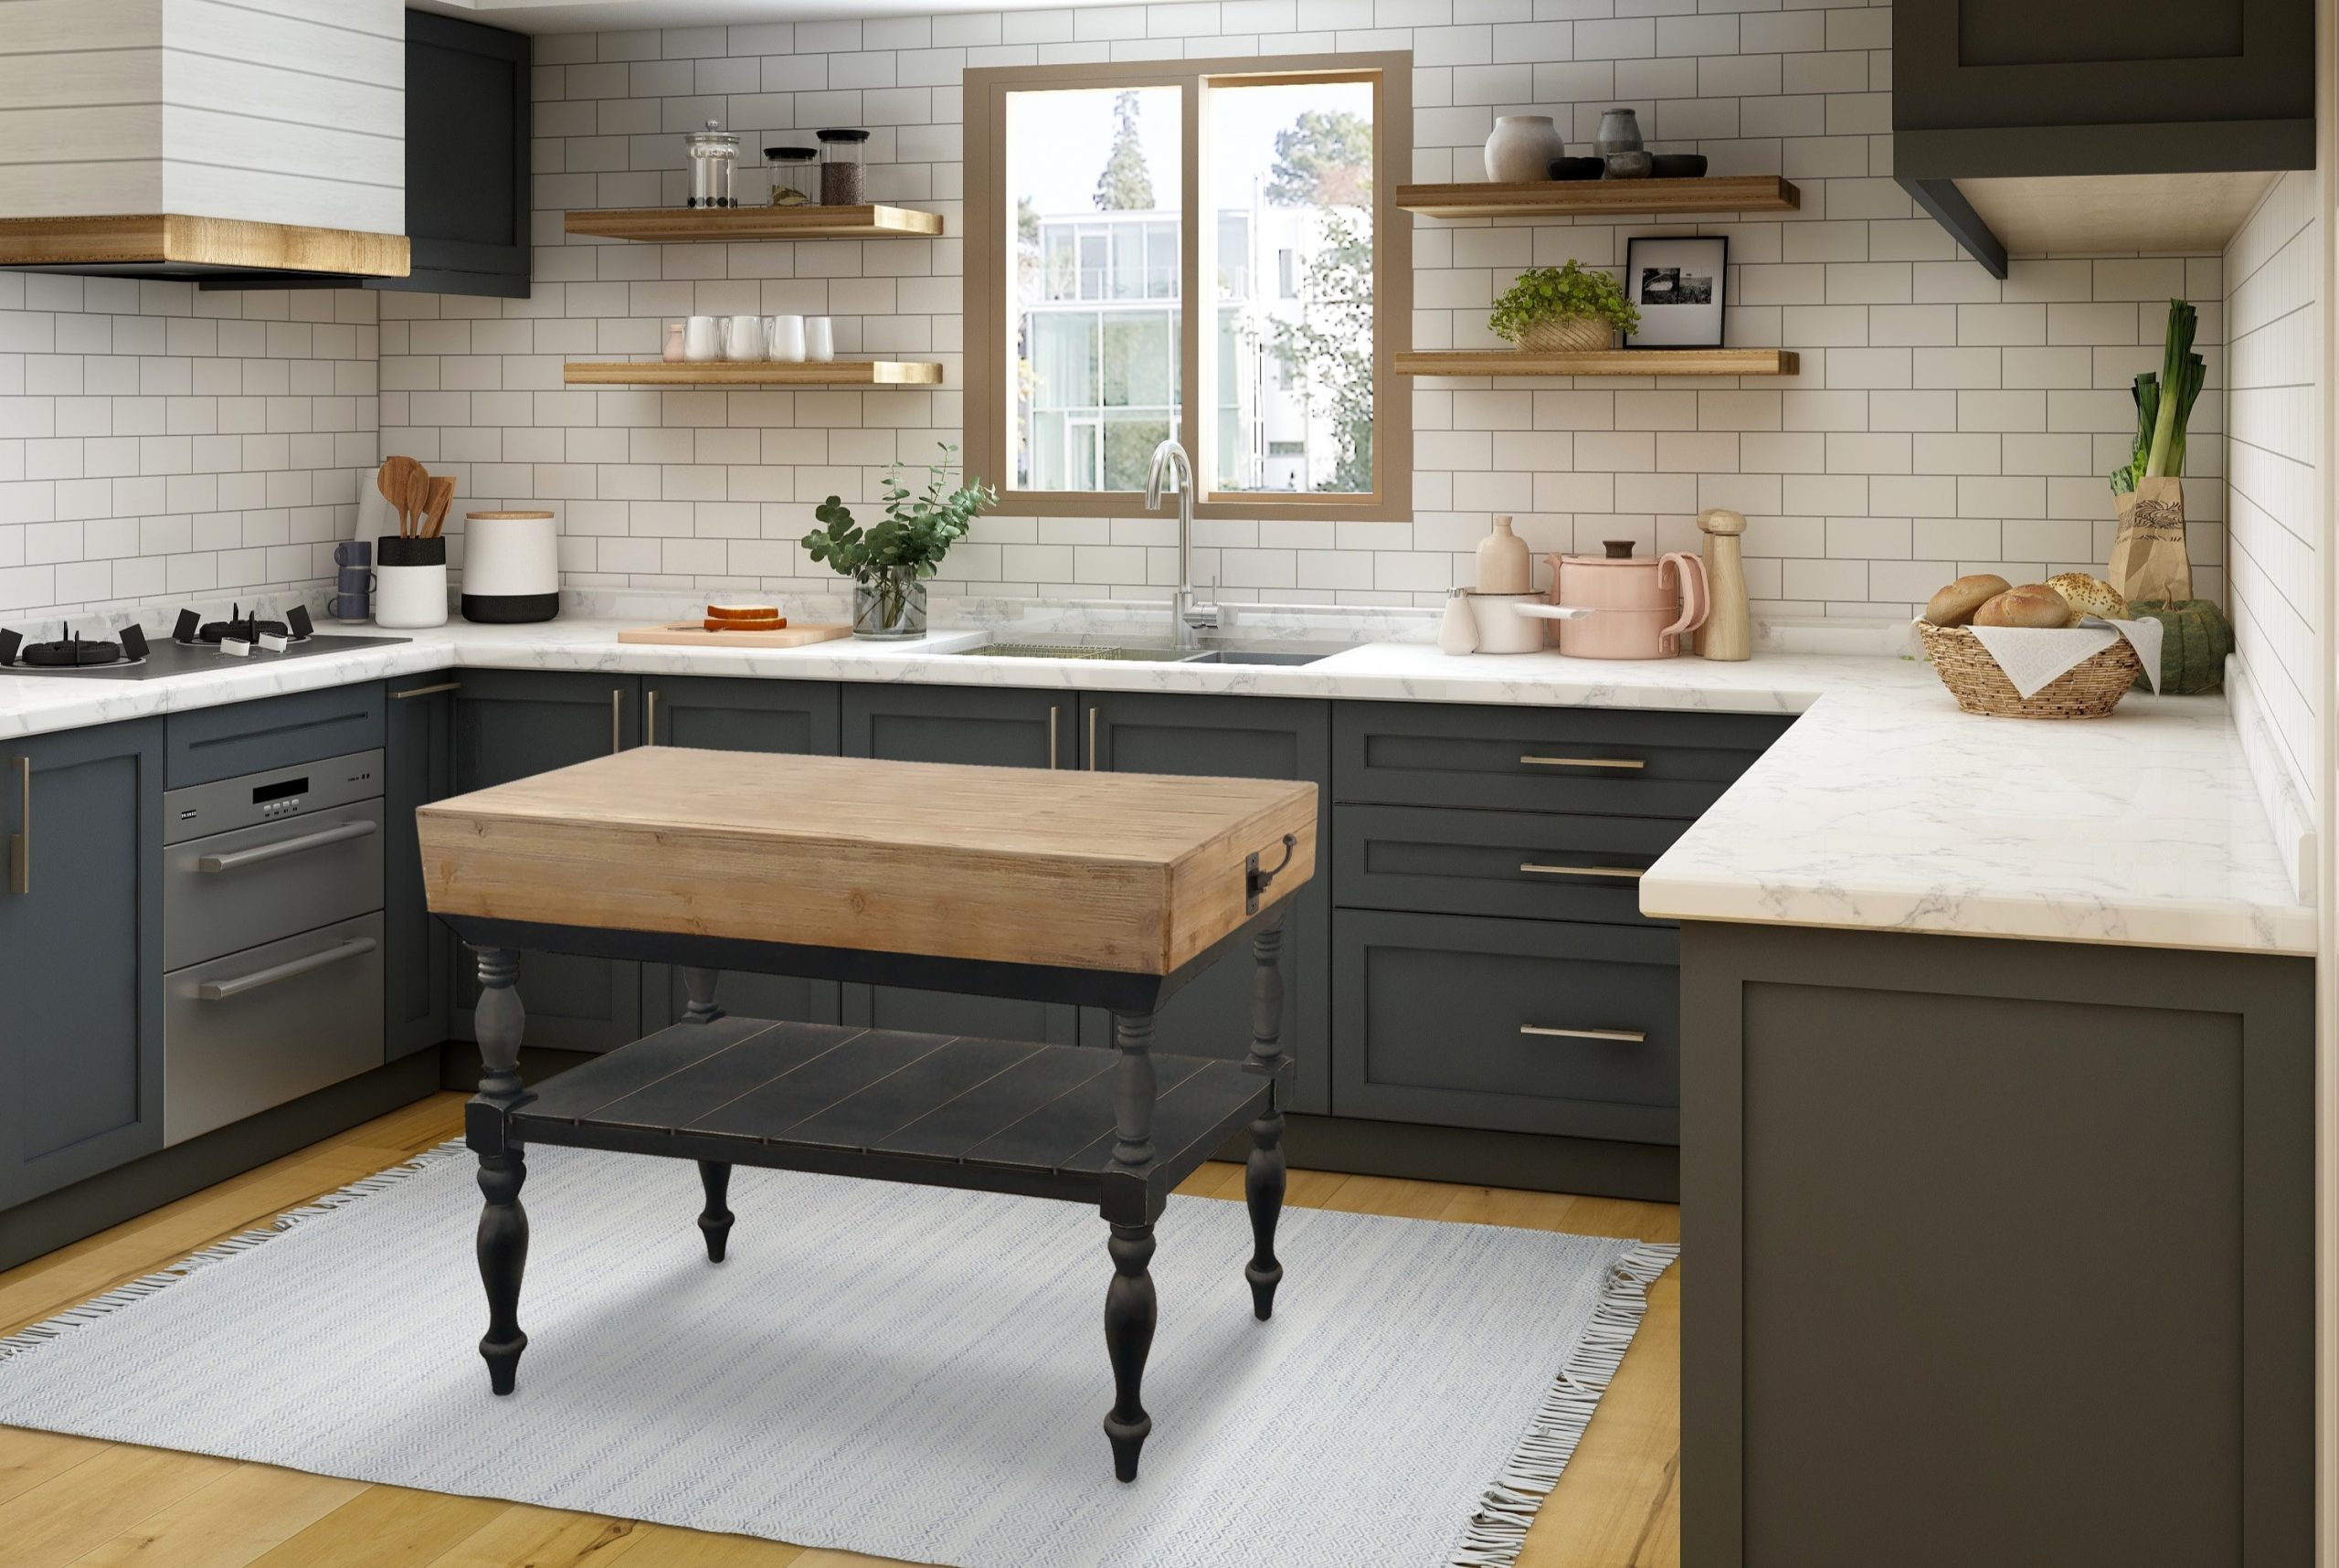 Farmhouse Kitchen Storage: Why it’s important and how to do it in style